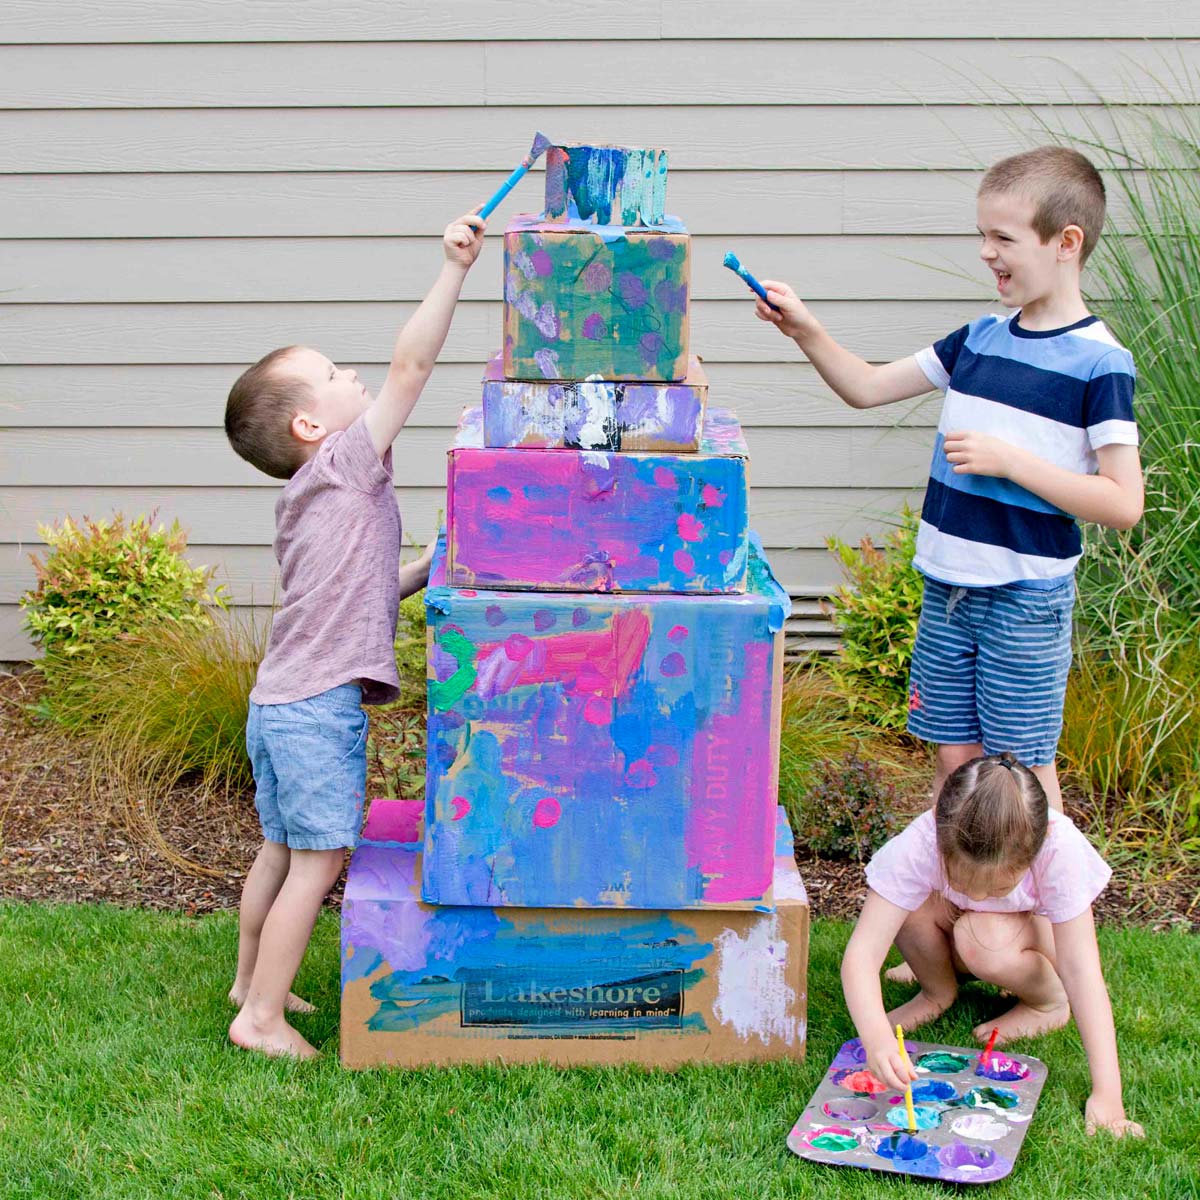 Three kids are outside painting a cardboard box wedding cake. One child is laughing, one is reaching up, and one is putting more paint on their brush.